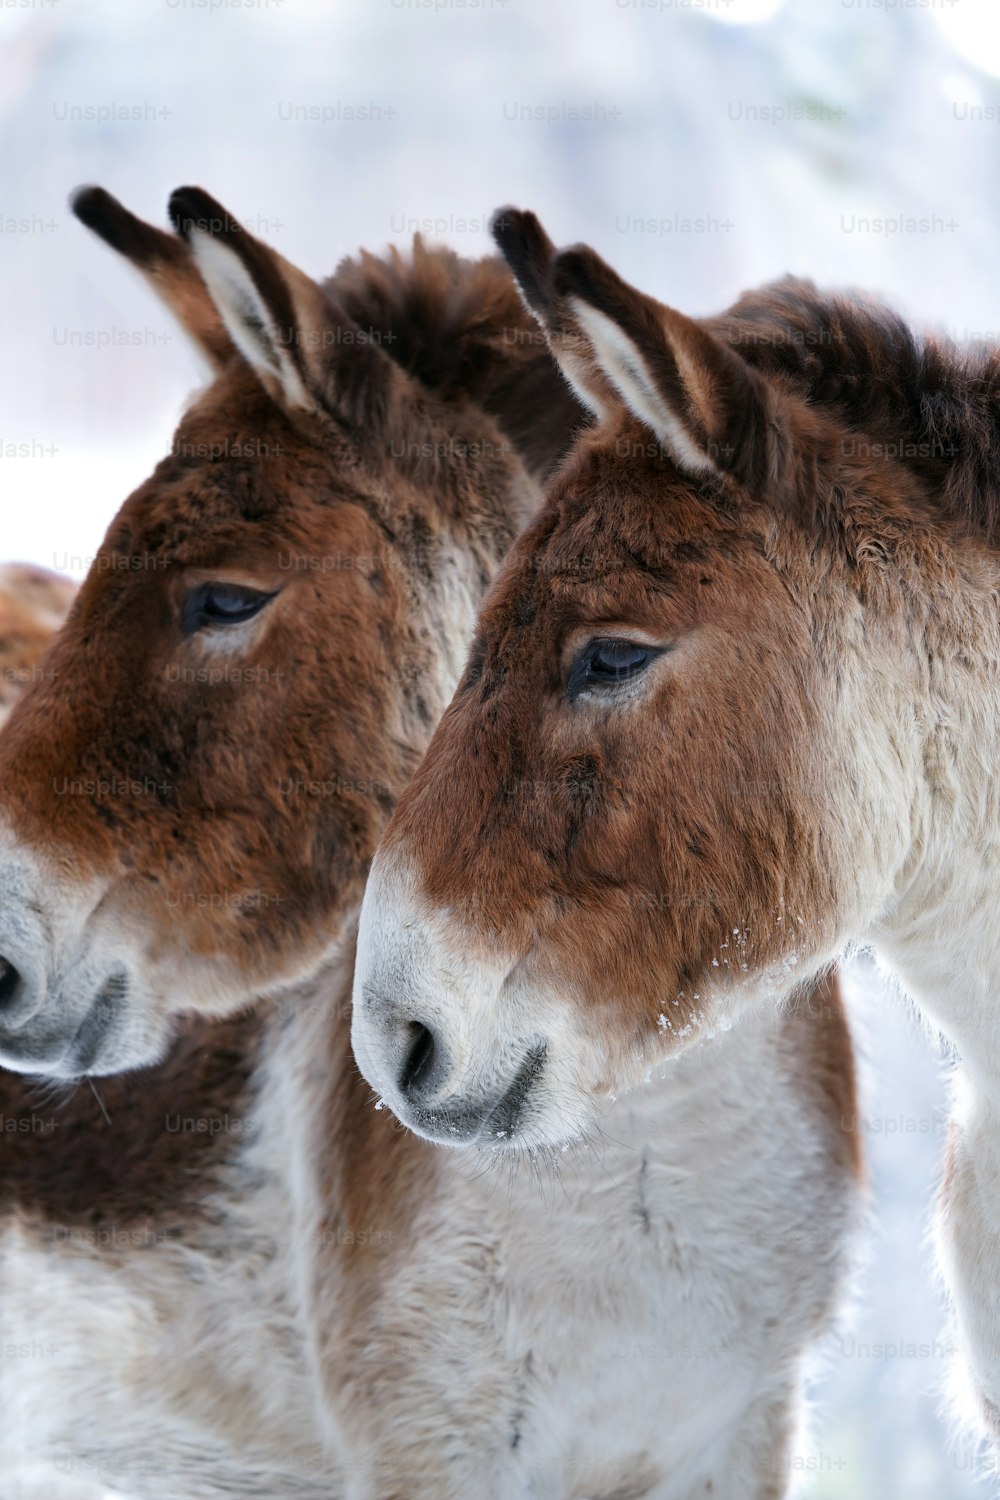 two brown and white donkeys standing next to each other